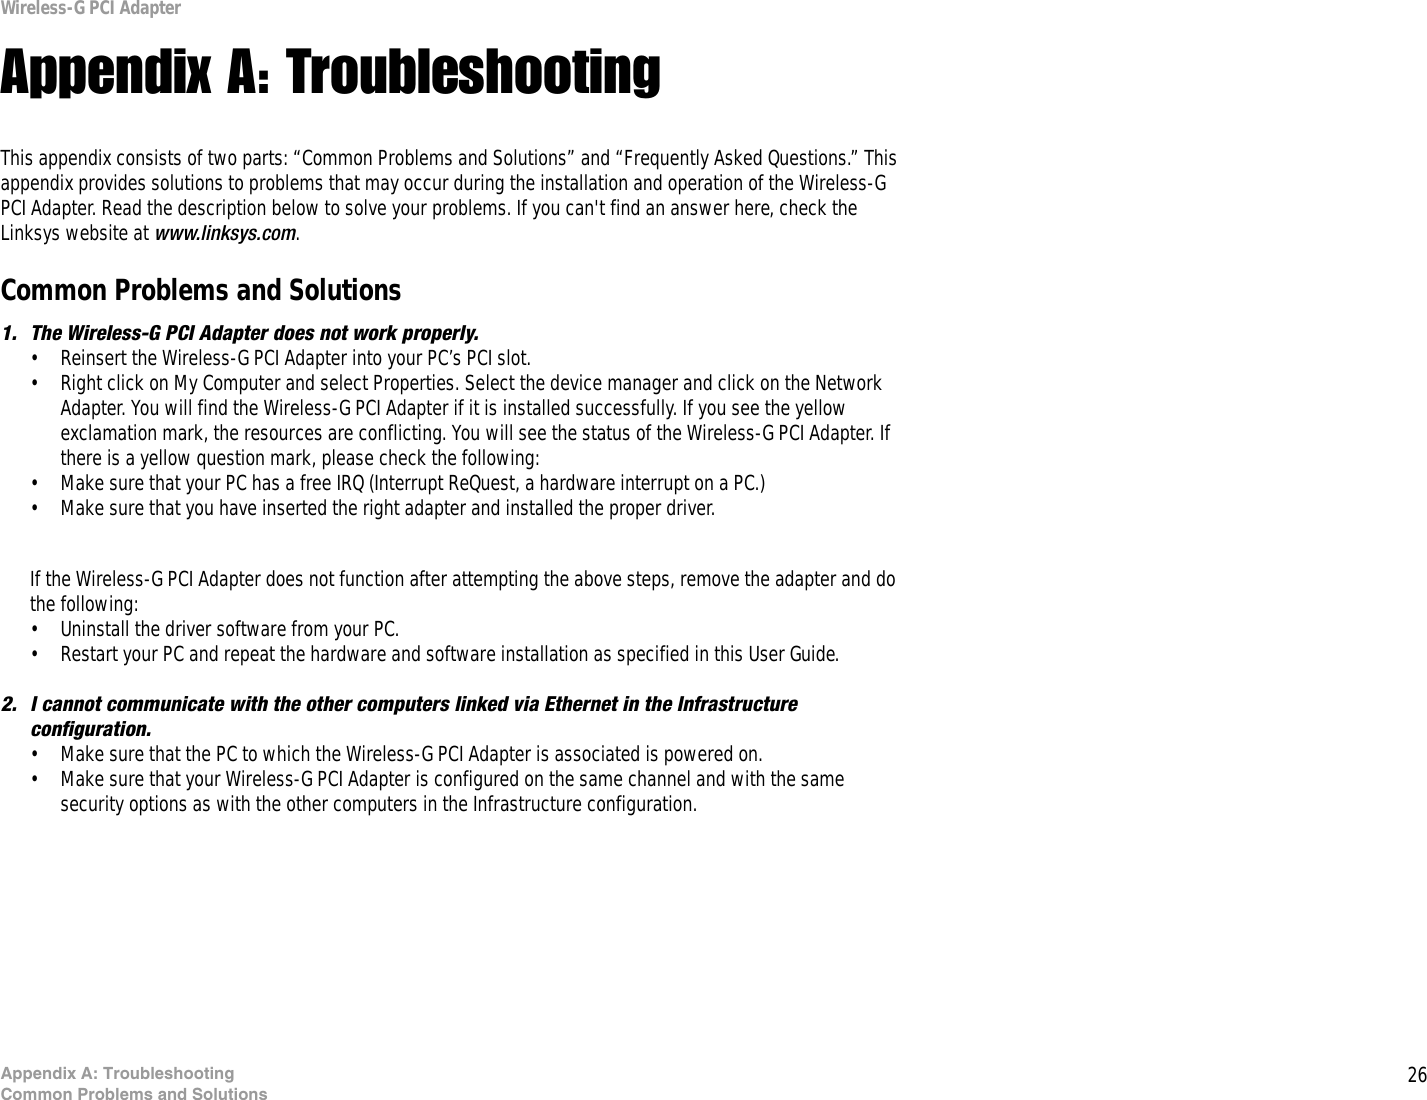 26Appendix A: TroubleshootingCommon Problems and SolutionsWireless-G PCI AdapterAppendix A: TroubleshootingThis appendix consists of two parts: “Common Problems and Solutions” and “Frequently Asked Questions.” This appendix provides solutions to problems that may occur during the installation and operation of the Wireless-G PCI Adapter. Read the description below to solve your problems. If you can&apos;t find an answer here, check the Linksys website at www.linksys.com.Common Problems and Solutions1. The Wireless-G PCI Adapter does not work properly.• Reinsert the Wireless-G PCI Adapter into your PC’s PCI slot.• Right click on My Computer and select Properties. Select the device manager and click on the Network Adapter. You will find the Wireless-G PCI Adapter if it is installed successfully. If you see the yellow exclamation mark, the resources are conflicting. You will see the status of the Wireless-G PCI Adapter. If there is a yellow question mark, please check the following:• Make sure that your PC has a free IRQ (Interrupt ReQuest, a hardware interrupt on a PC.) • Make sure that you have inserted the right adapter and installed the proper driver.If the Wireless-G PCI Adapter does not function after attempting the above steps, remove the adapter and do the following:• Uninstall the driver software from your PC.• Restart your PC and repeat the hardware and software installation as specified in this User Guide.2. I cannot communicate with the other computers linked via Ethernet in the Infrastructure configuration.• Make sure that the PC to which the Wireless-G PCI Adapter is associated is powered on.• Make sure that your Wireless-G PCI Adapter is configured on the same channel and with the same security options as with the other computers in the Infrastructure configuration. 